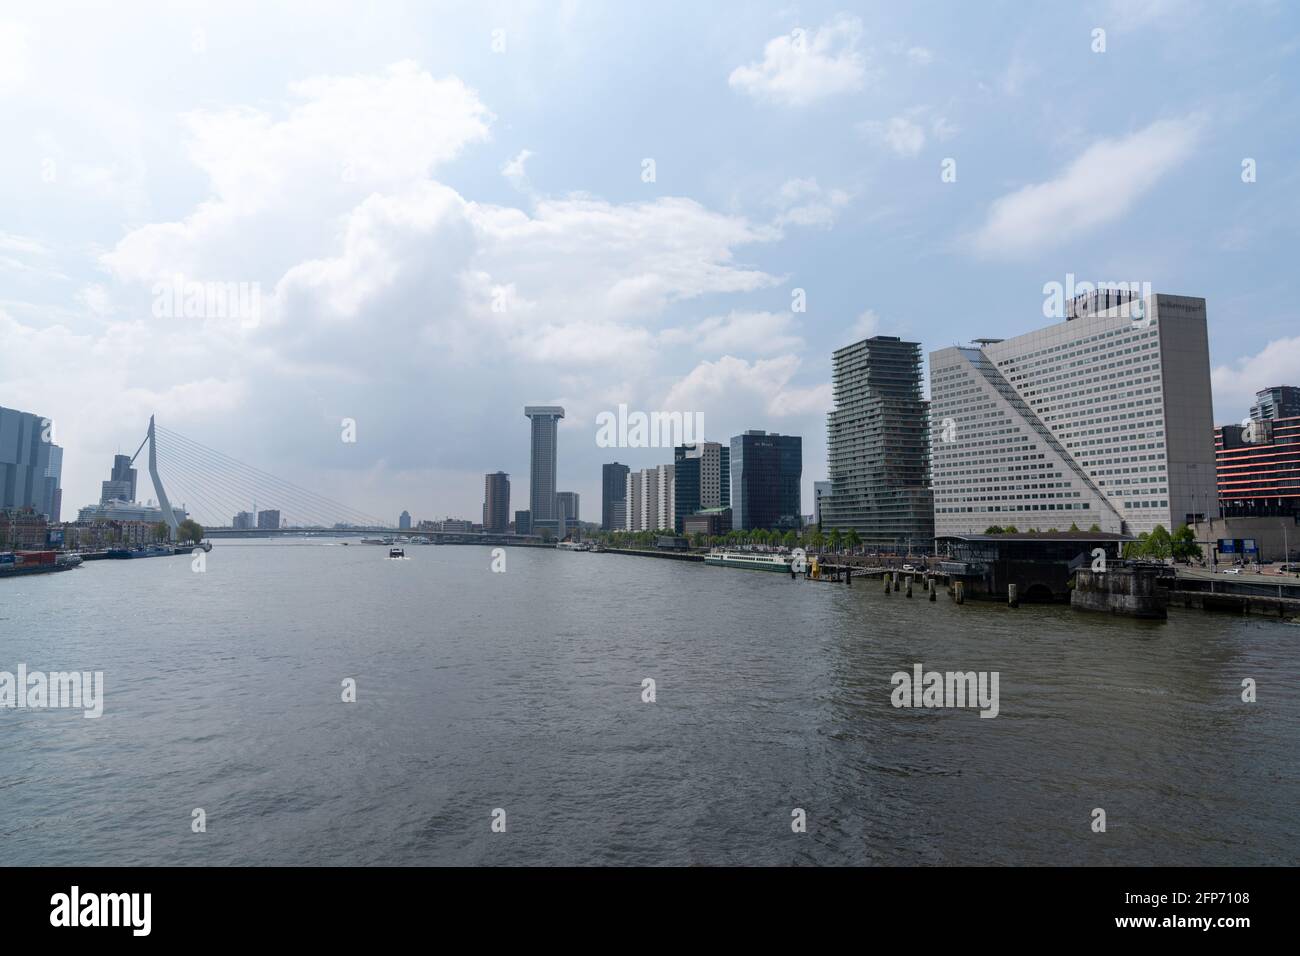 Rotterdam, Netherlands - 14 May, 2021: cityscape view of the Nieuwe Maas River and downtown Rotterdam Stock Photo